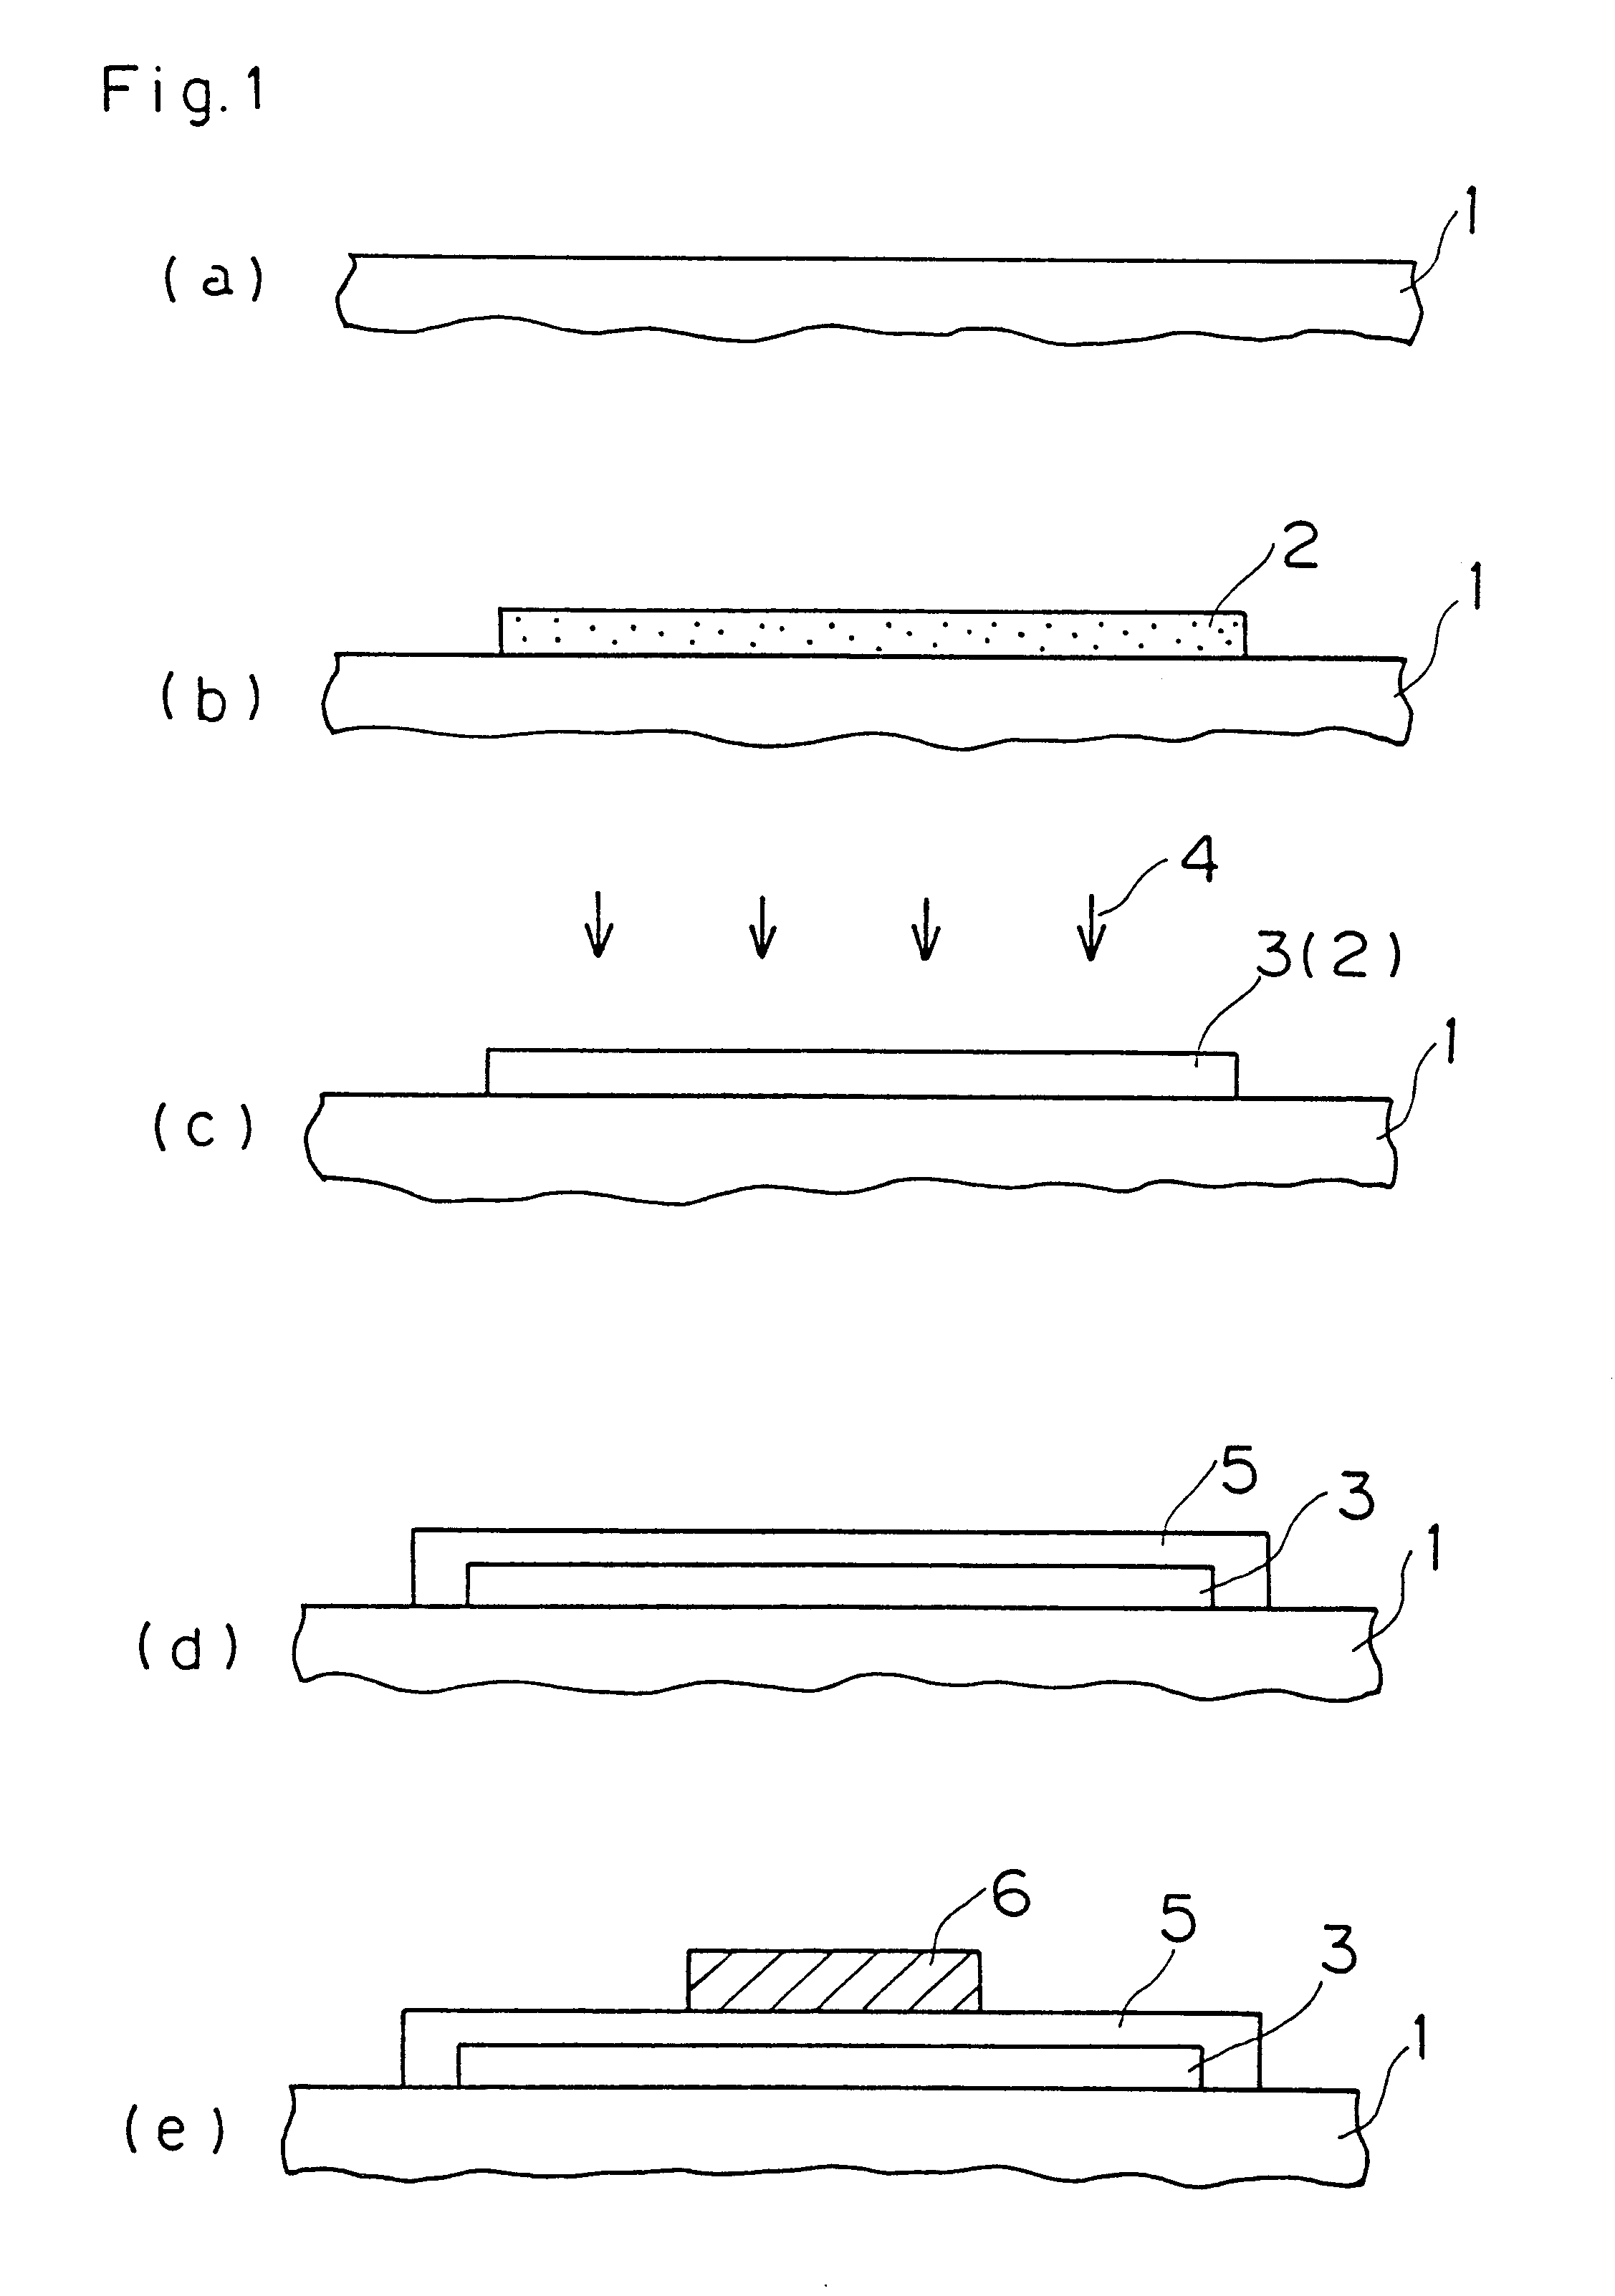 Semiconductor device manufacturing with amorphous film cyrstallization using wet oxygen